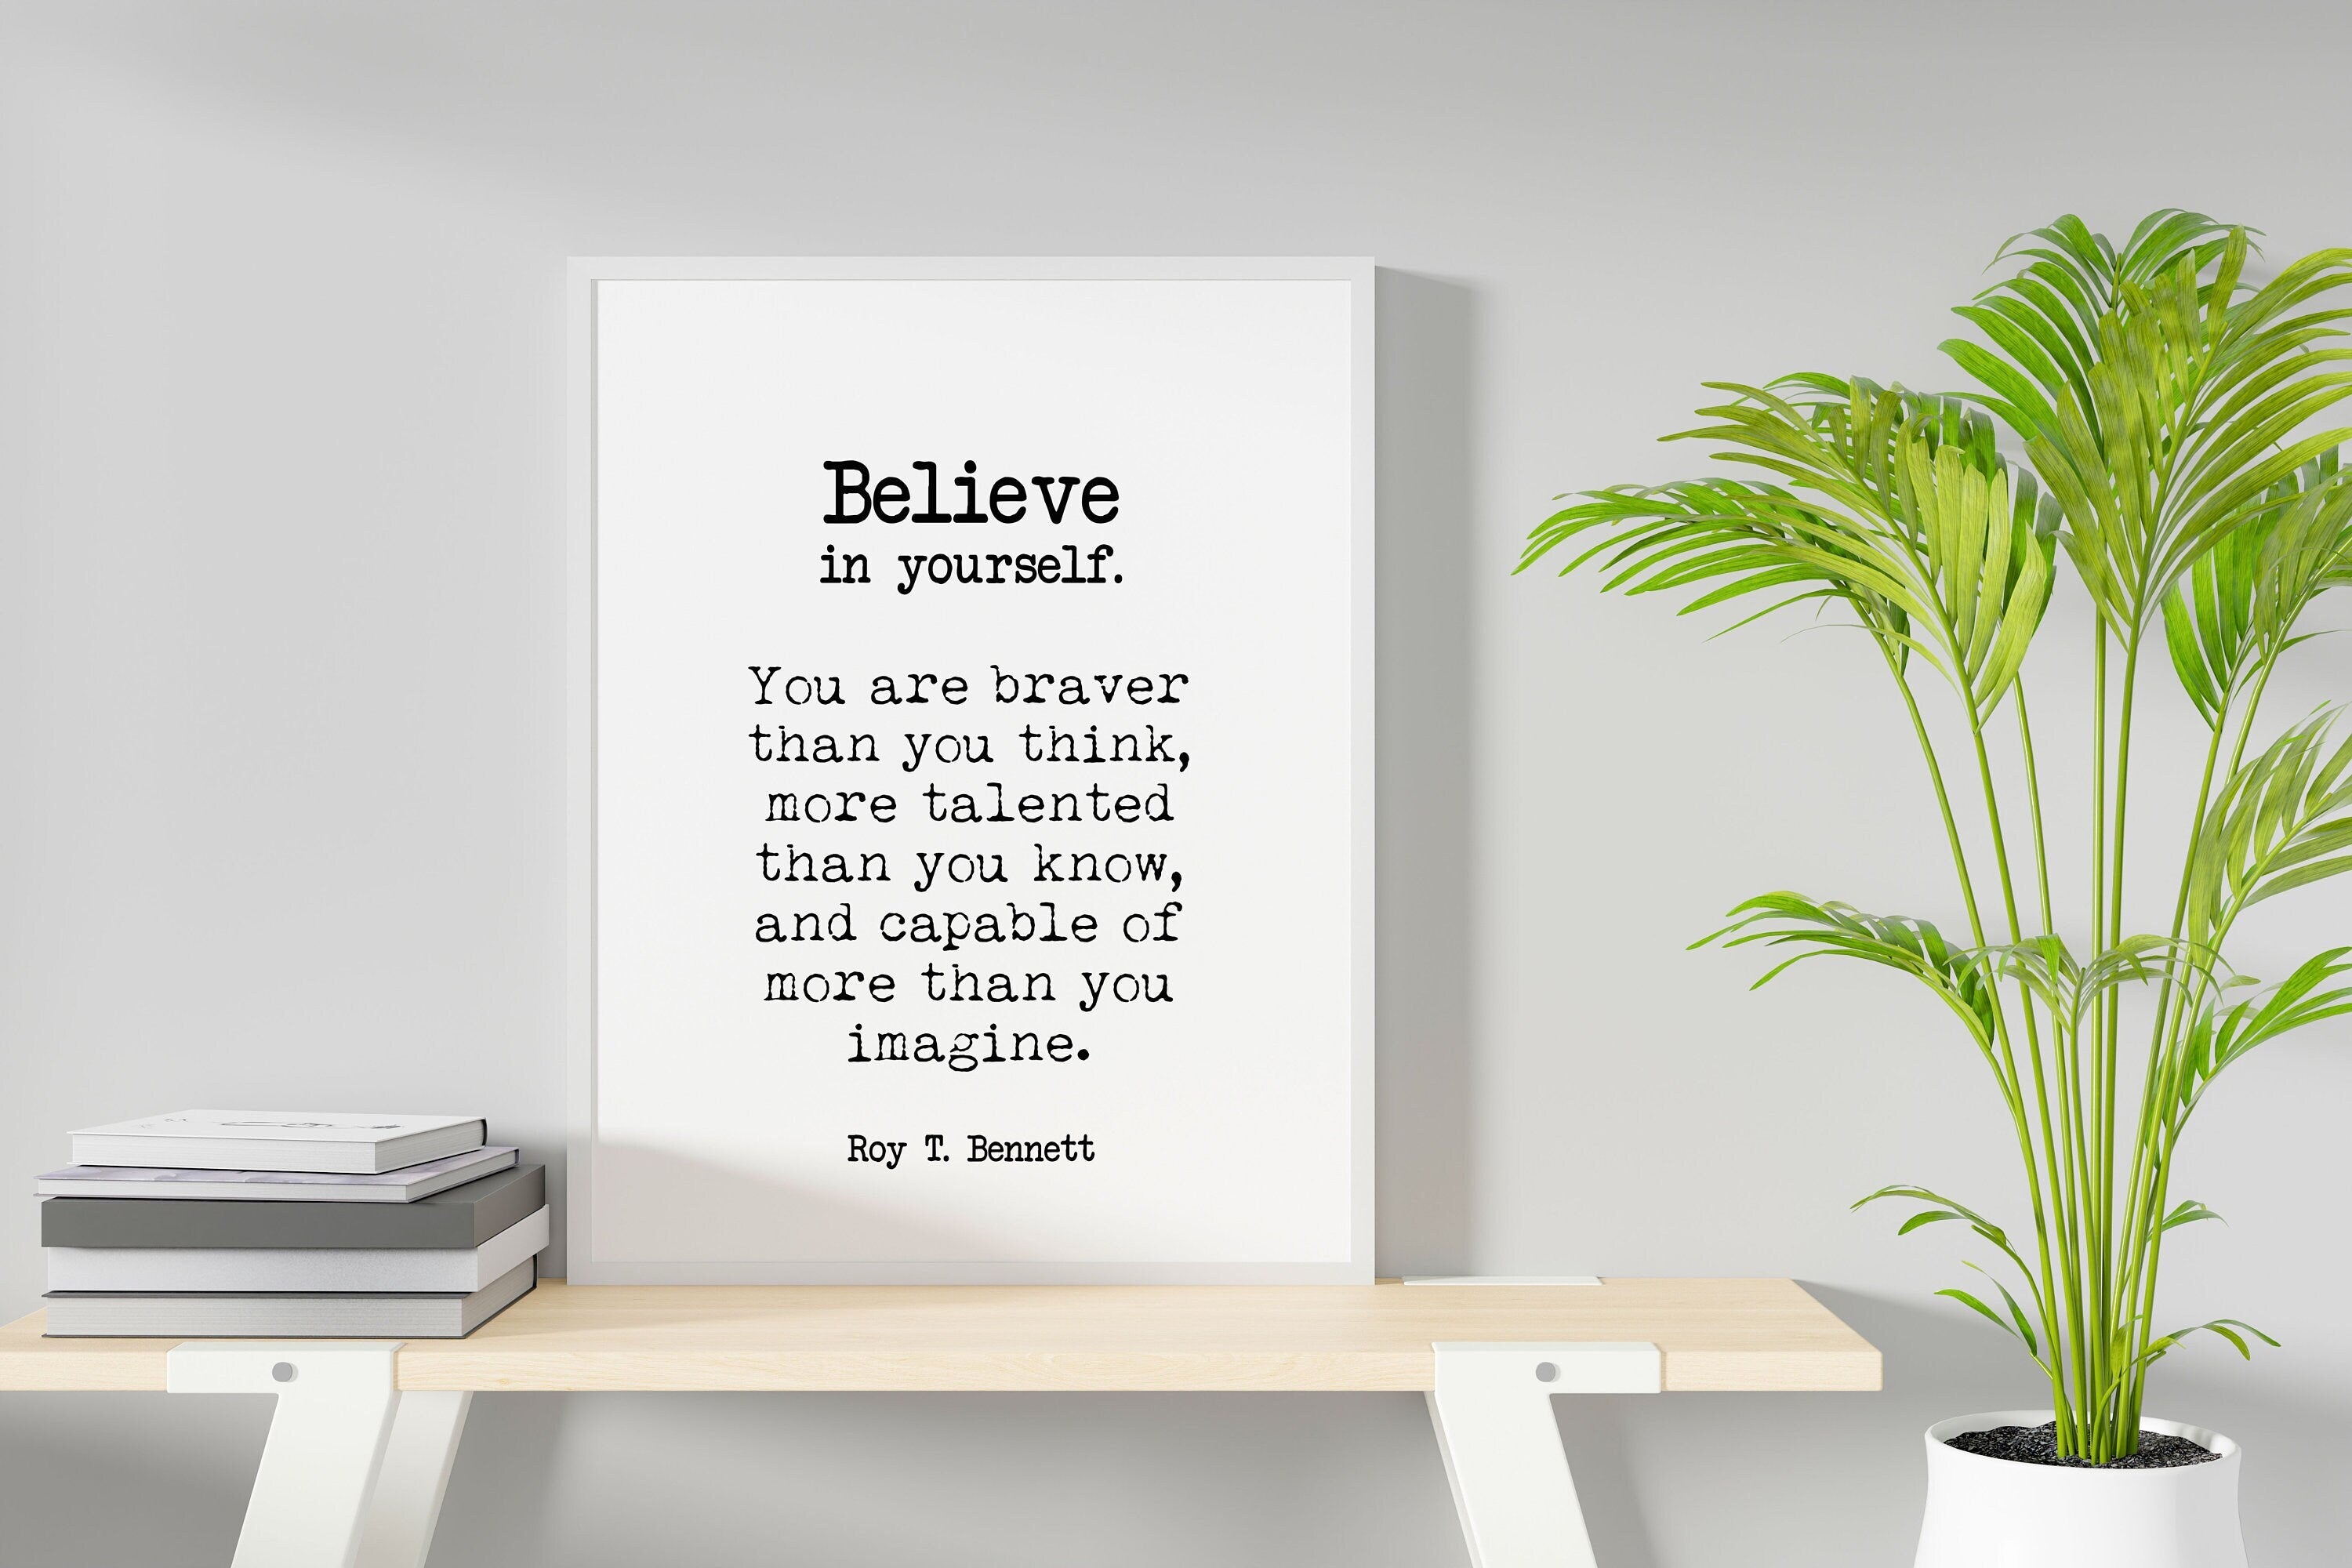 Roy T Bennett Quote Literary Art Print, Believe in Yourself Poster in Black & White and Vintage for Home Wall Decor, Framed or Unframed Art